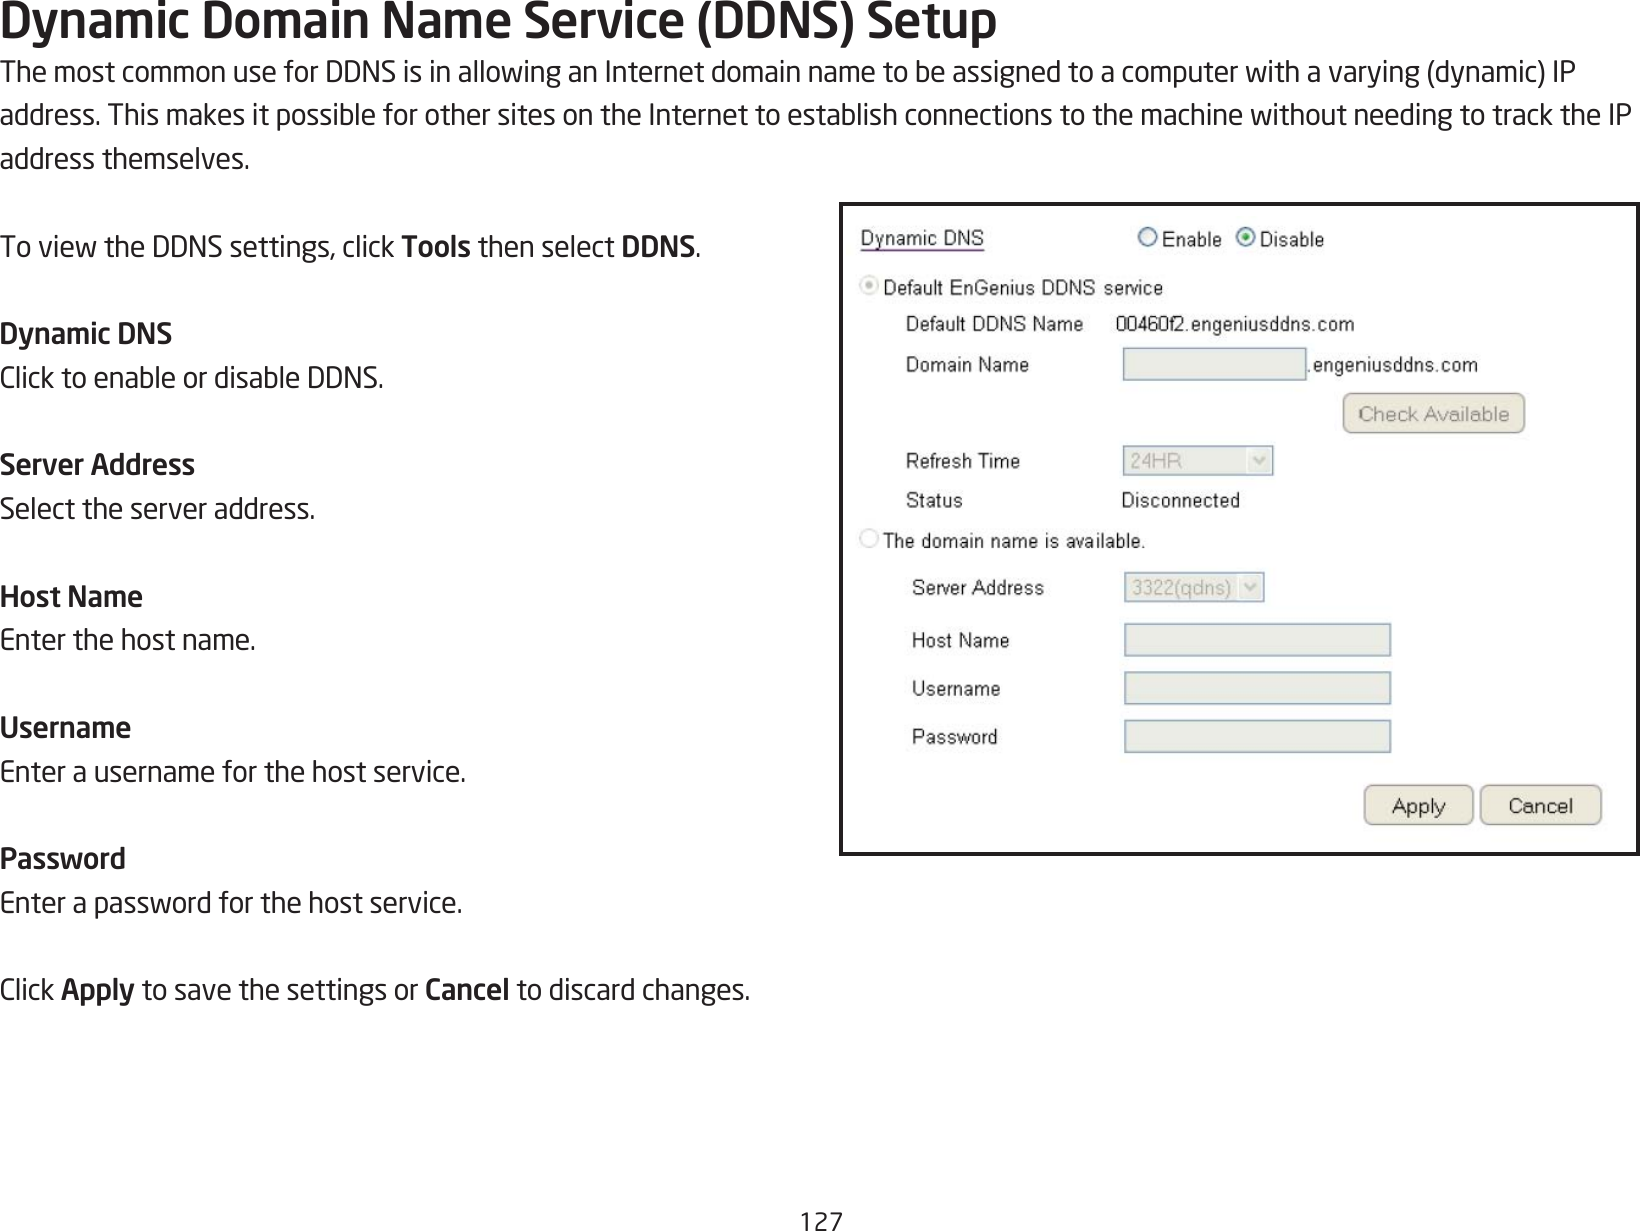 127Dynamic Domain Name Service (DDNS) SetupThemostcommonuseforDDNSisinallowinganInternetdomainnametobeassignedtoacomputerwithavarying(dynamic)IPaddress.ThismakesitpossibleforothersitesontheInternettoestablishconnectionstothemachinewithoutneedingtotracktheIPaddress themselves.ToviewtheDDNSsettings,clickTools then select DDNS.Dynamic DNSClicktoenableordisableDDNS.Server AddressSelect the server address.Host NameEnter the host name.UsernameEnter a username for the host service.PasswordEnterapasswordforthehostservice.ClickApply to save the settings or Cancel to discard changes.